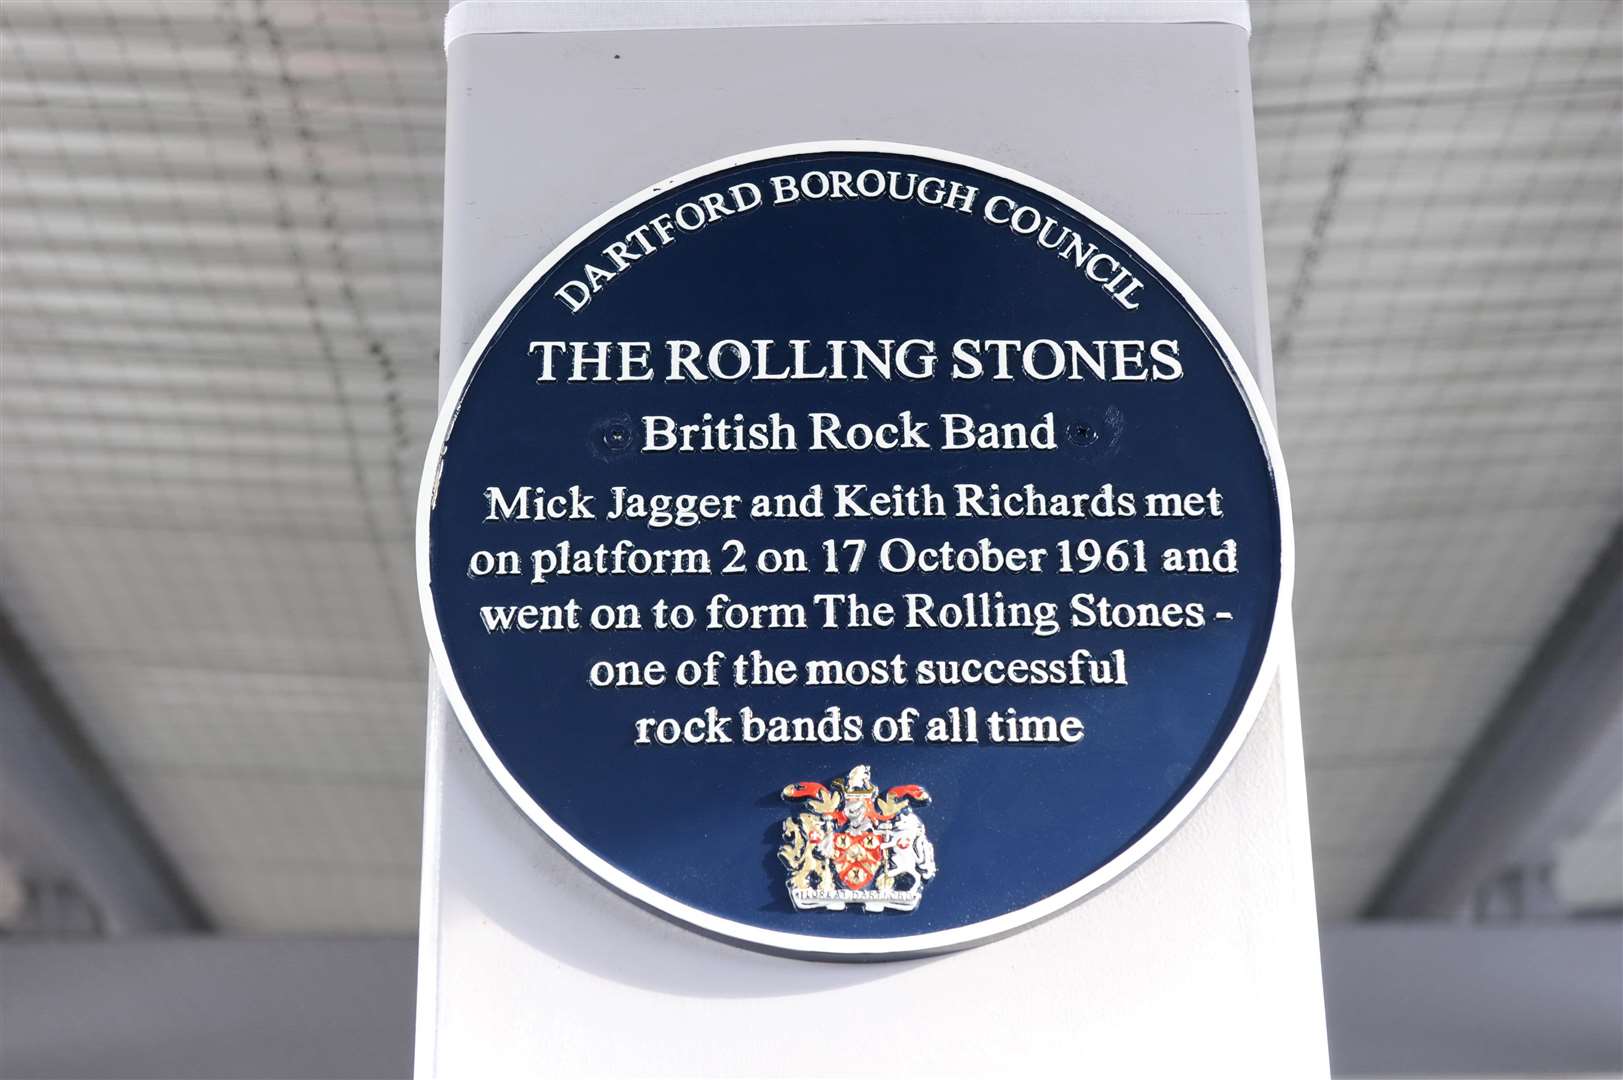 The blue plaque at Dartford Railway Station marks where Mick Jagger and Keith Richards met before going on to join the Rolling Stones